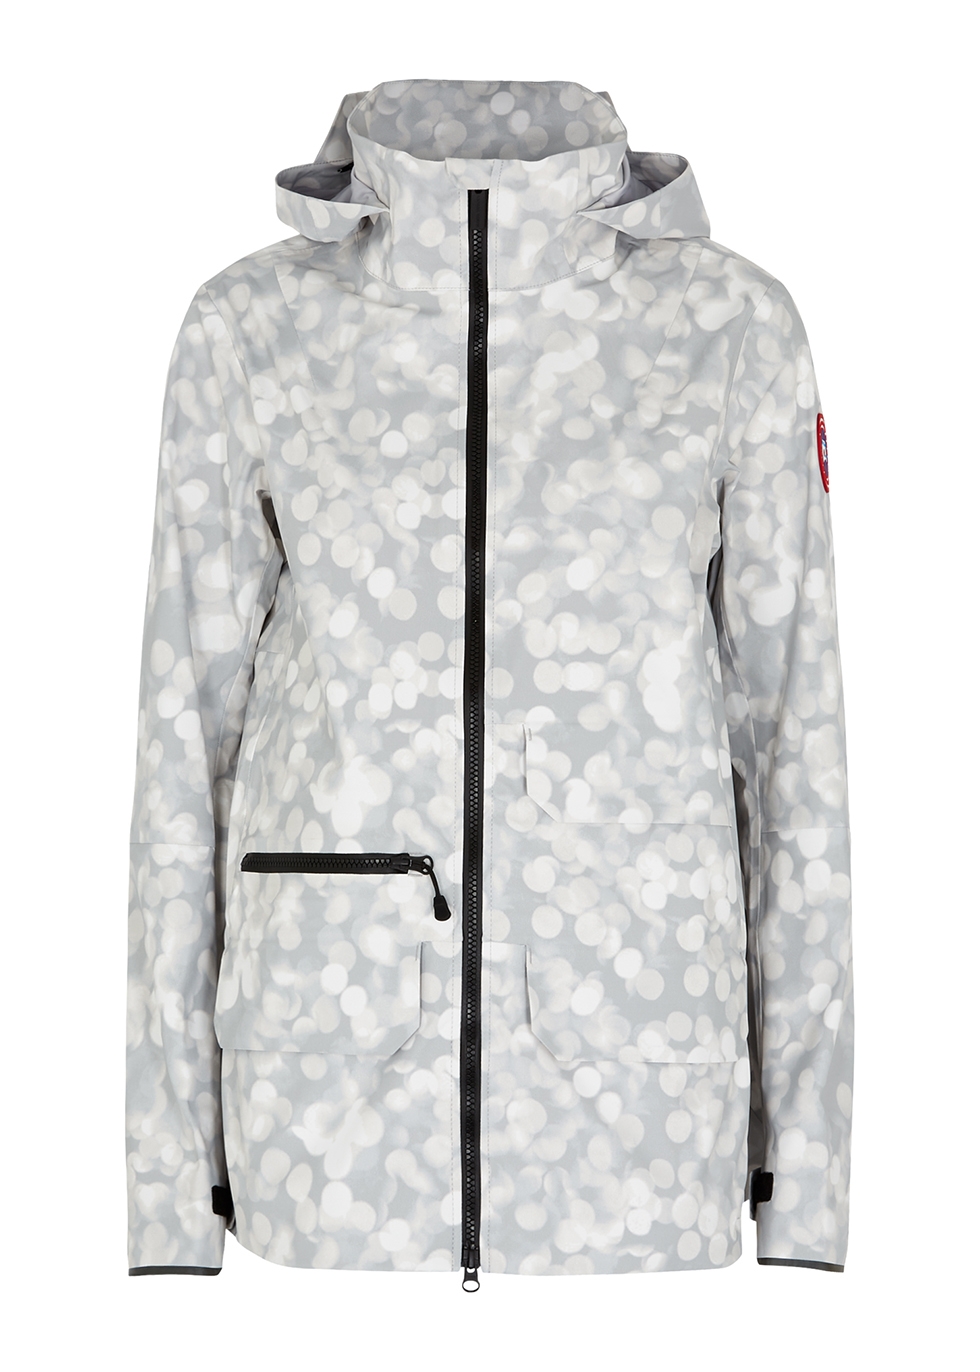 Pacifica printed Tri-Durance shell jacket